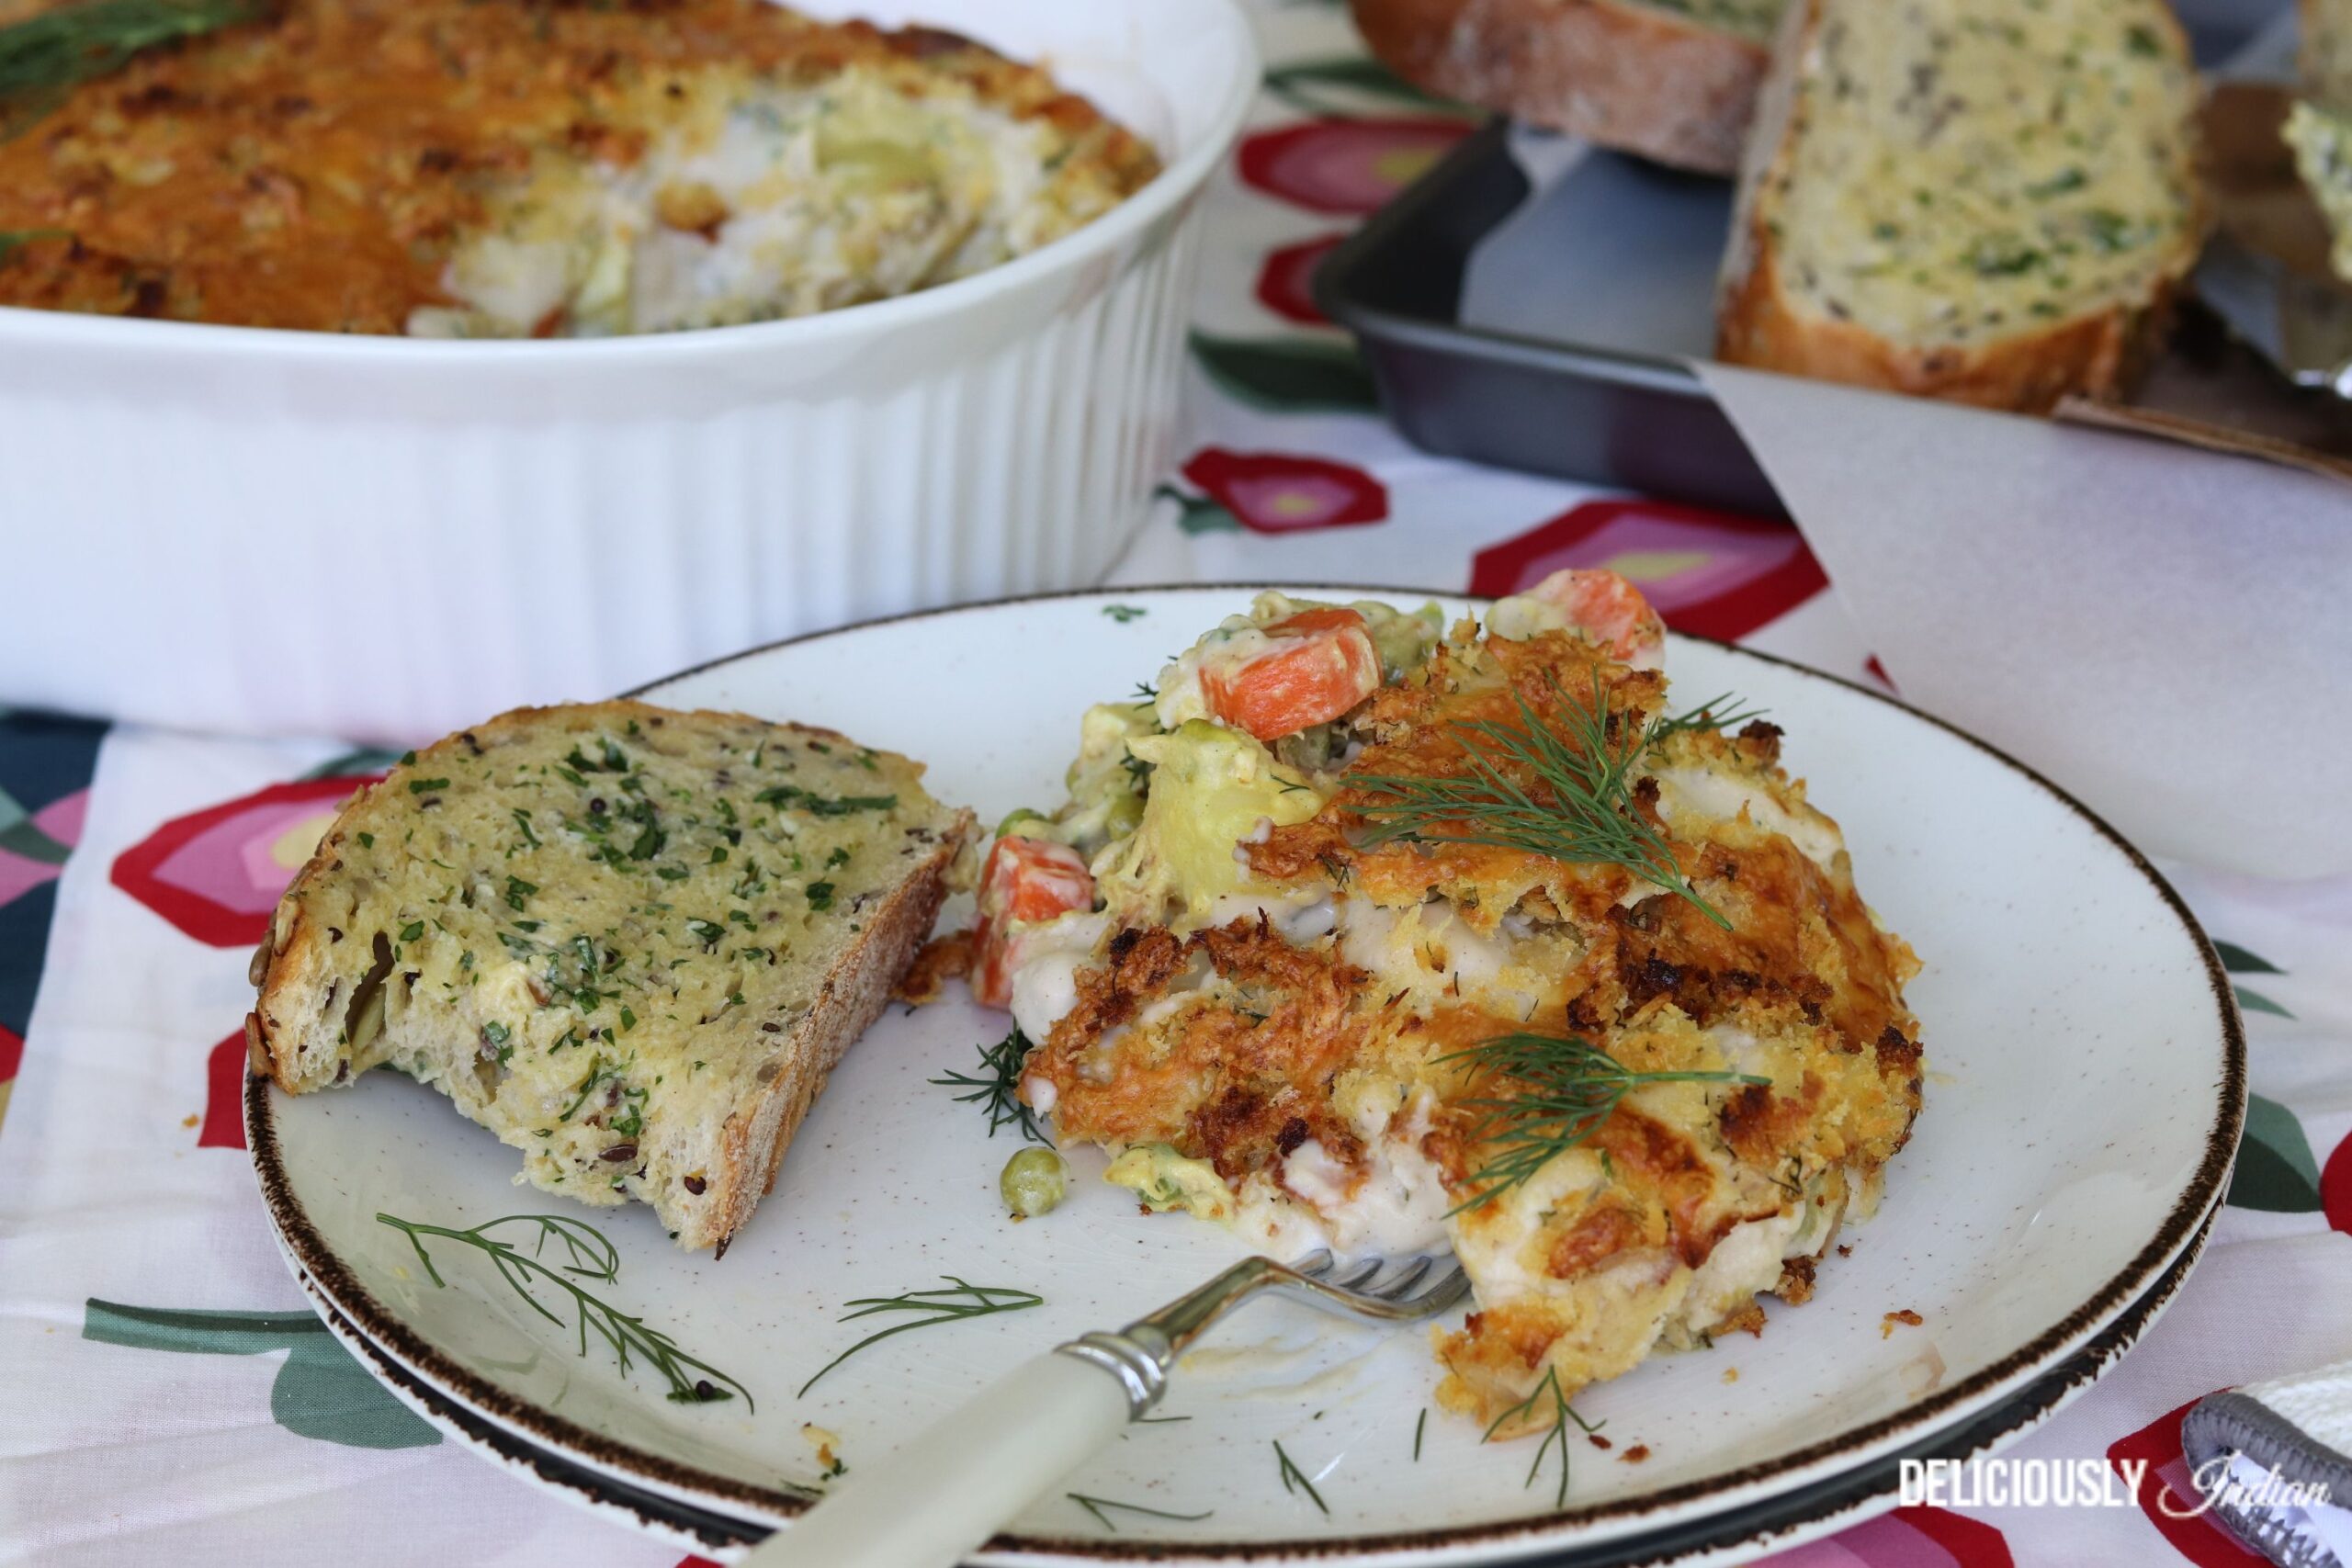 Tuna Bake with Vegetables